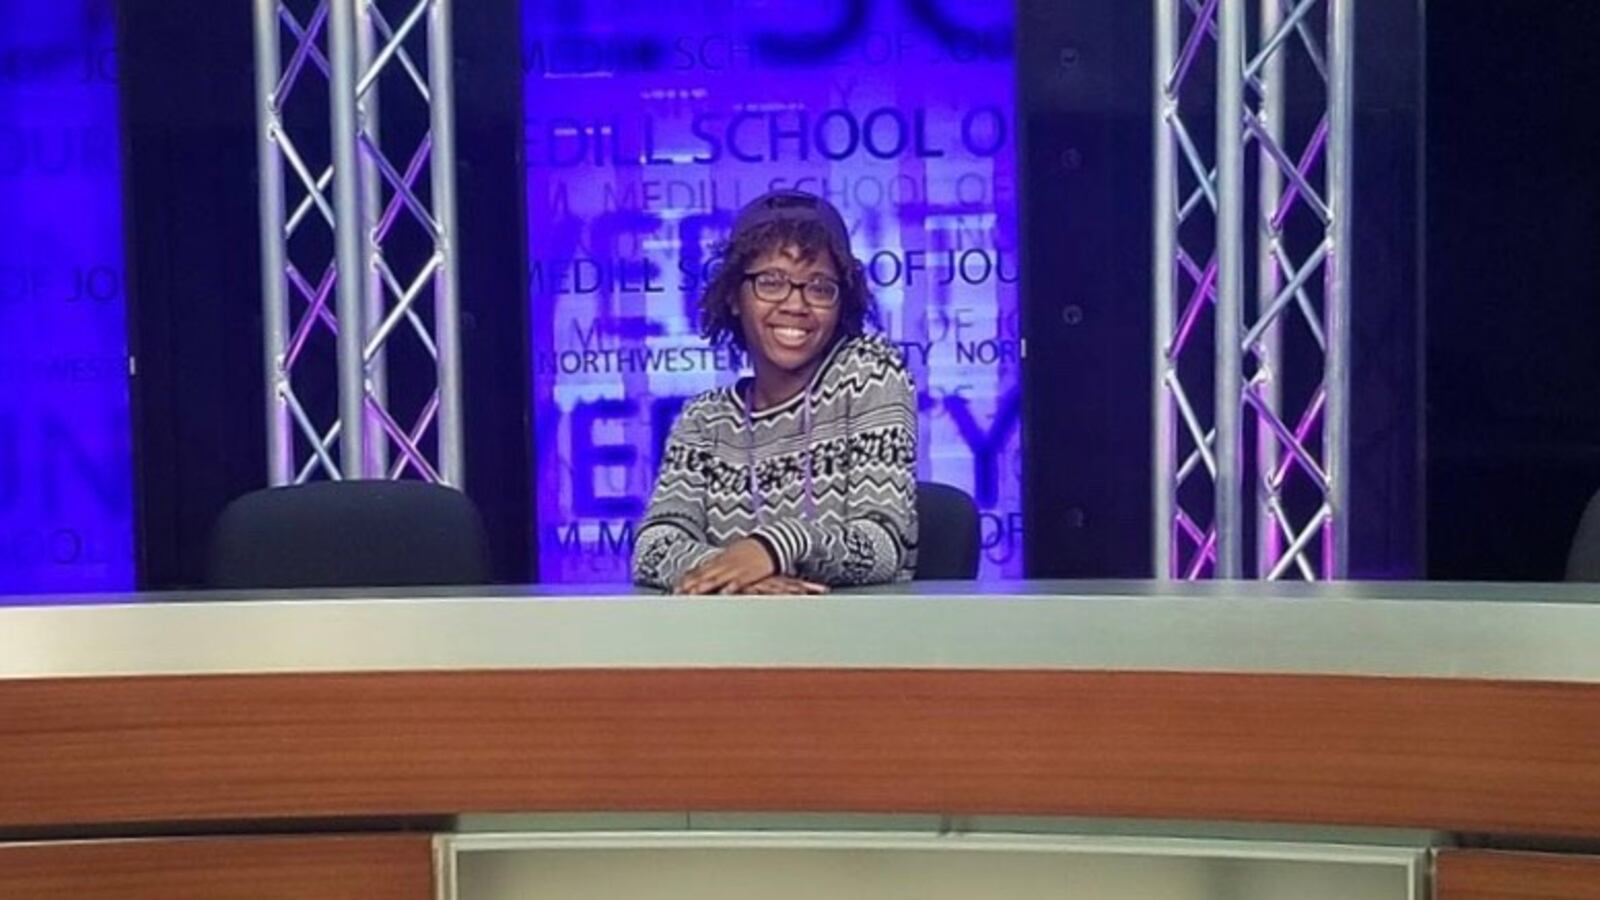 Imani Harris, pictured here during her senior year visit to Northwestern University, said her transition from a Detroit high school to college was challenging.